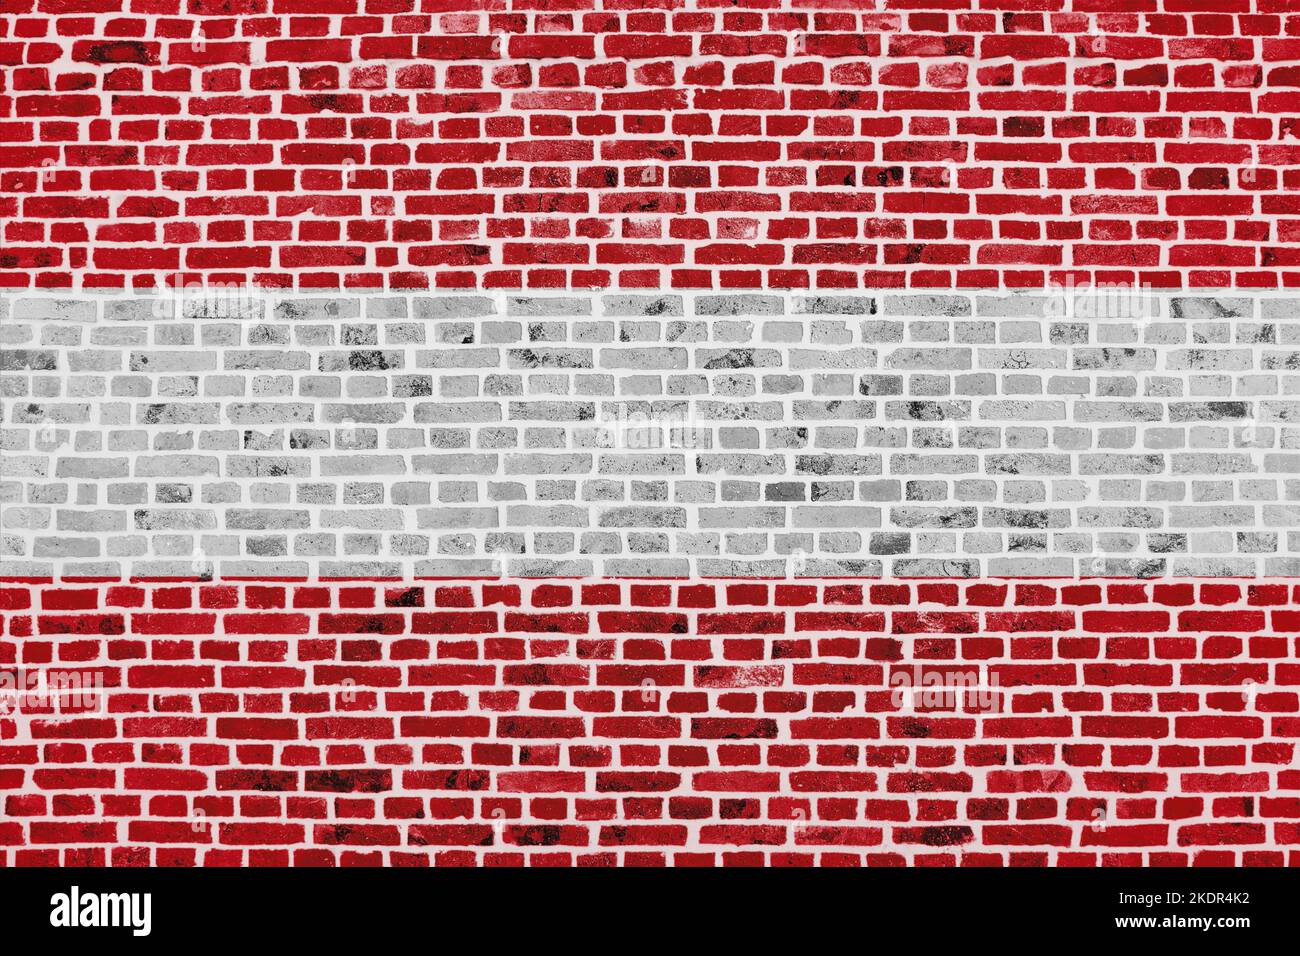 Close-up on a brick wall with the flag of Austria painted on it. Stock Photo